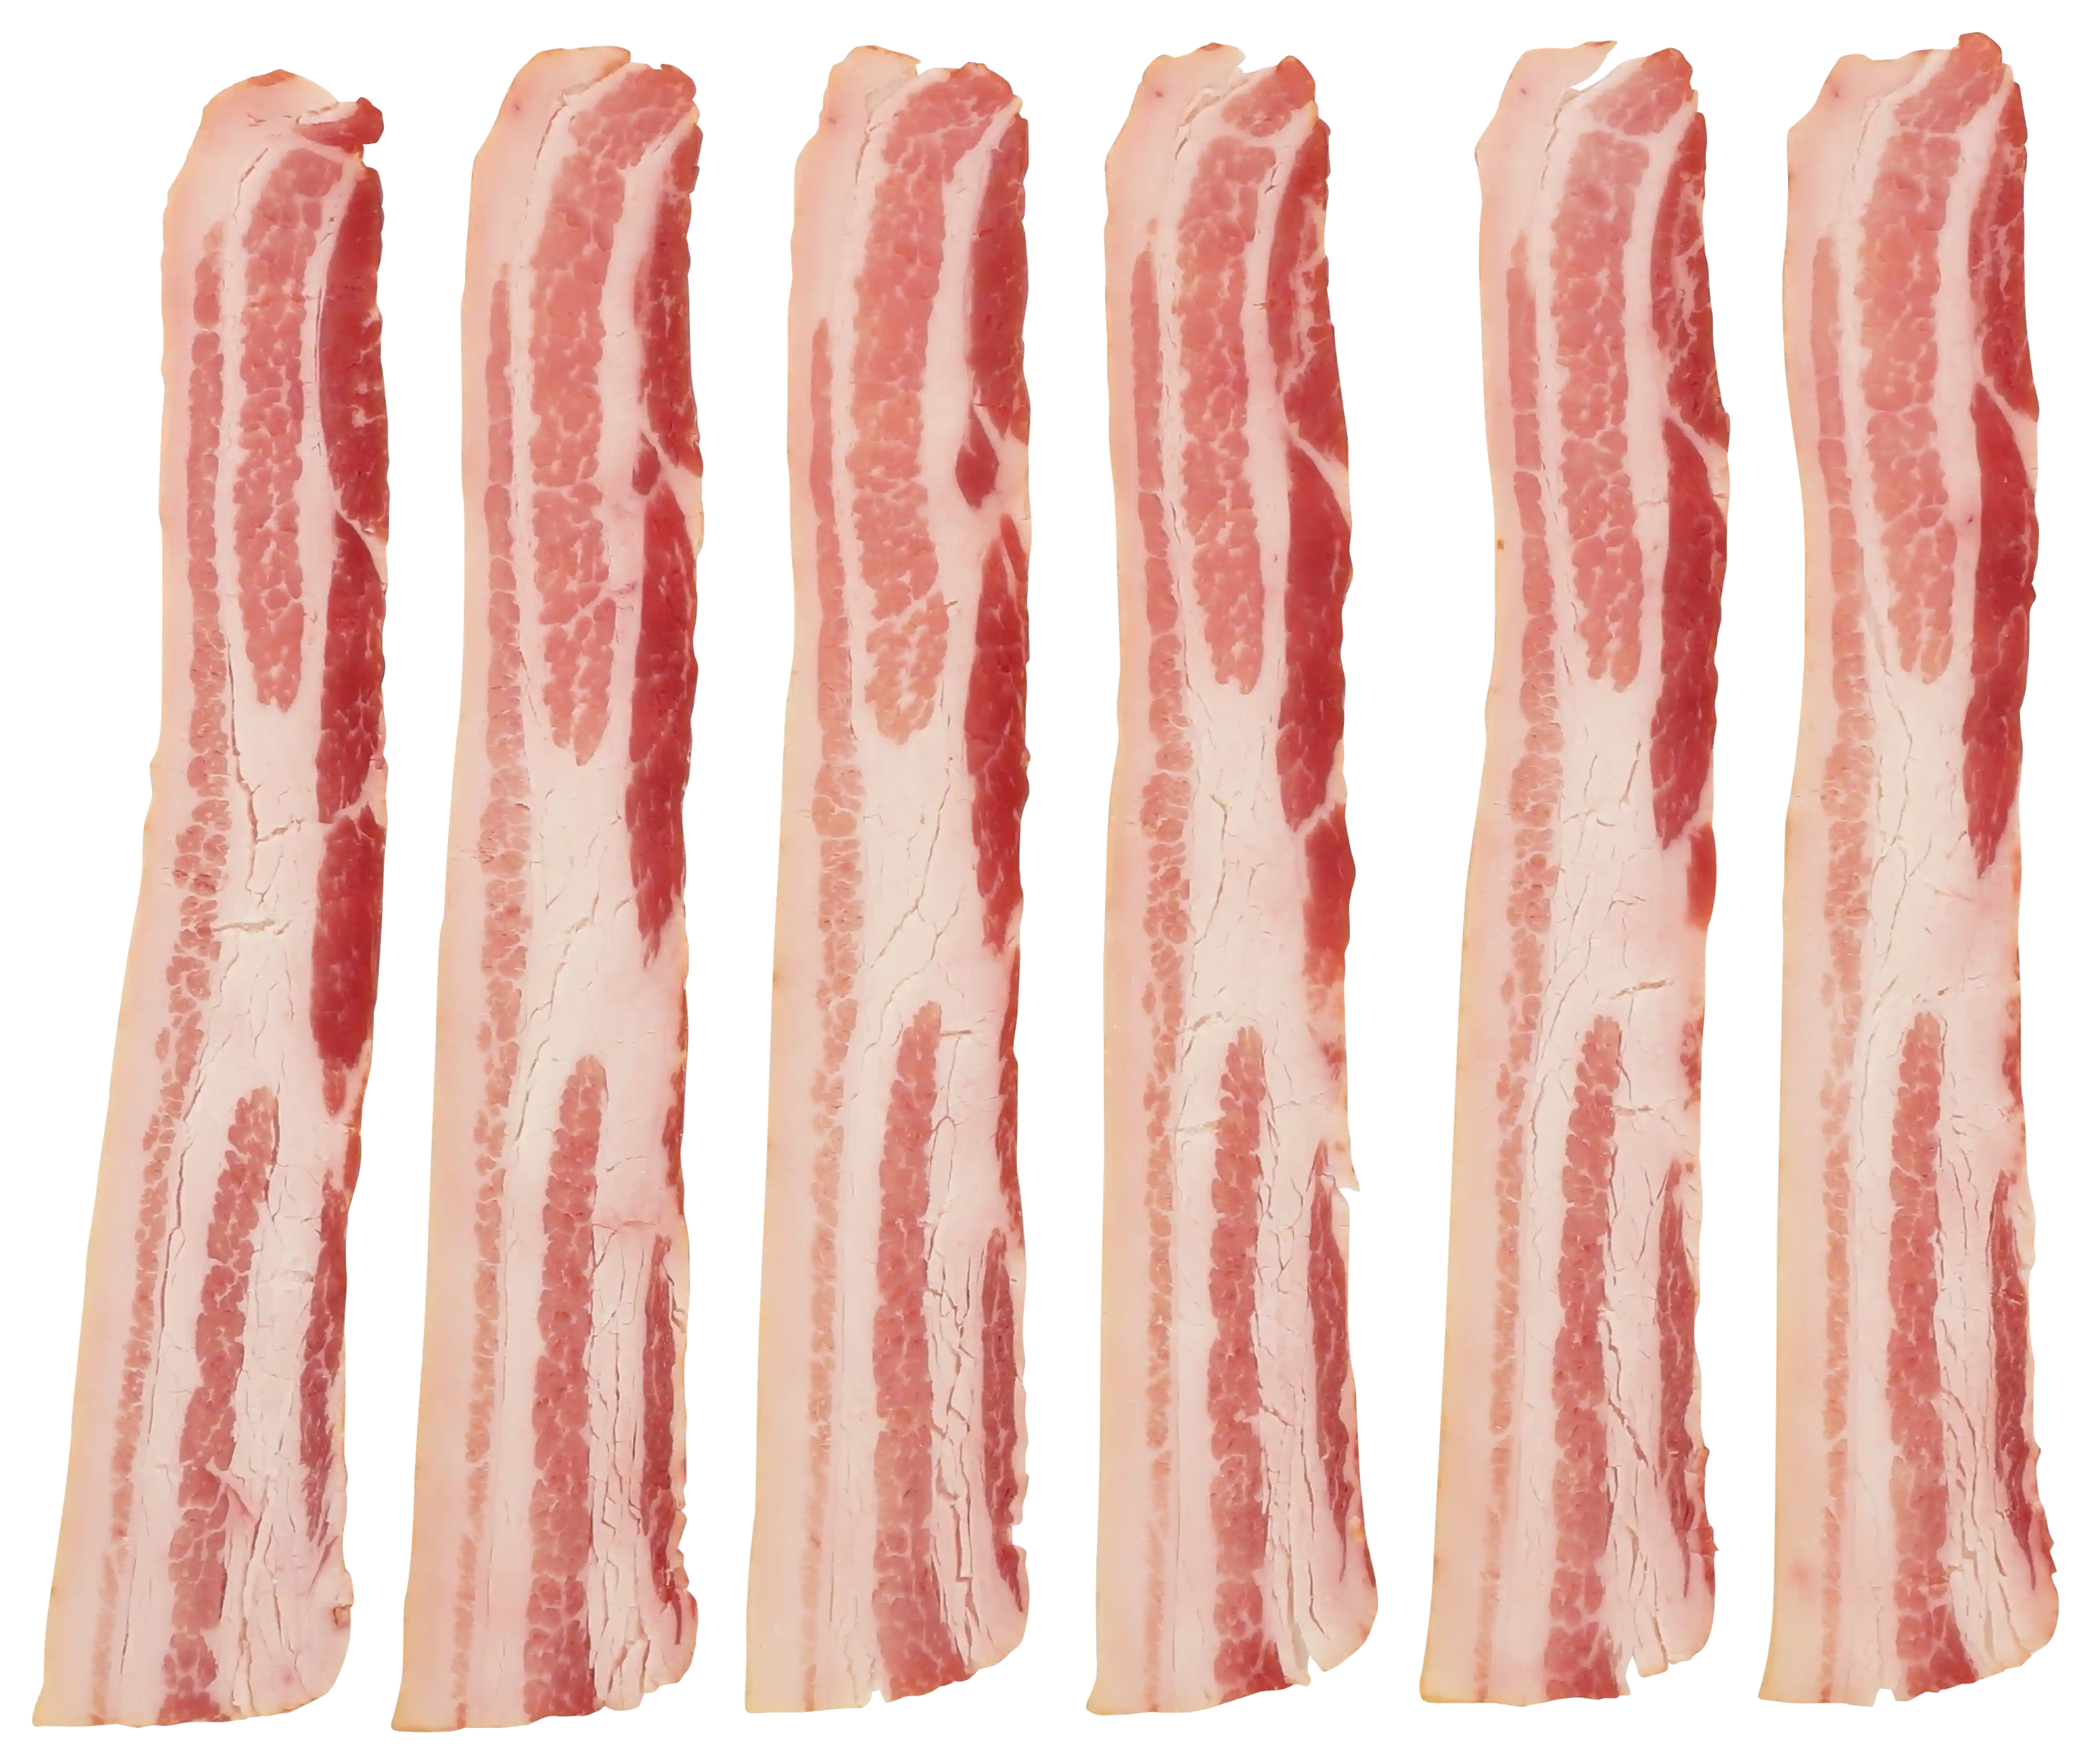 Wright® Brand Naturally Hickory Smoked Regular Sliced Bacon, Flat-Pack®, 15 Lbs, 14-18 Slices per Pound, Gas Flushed_image_11